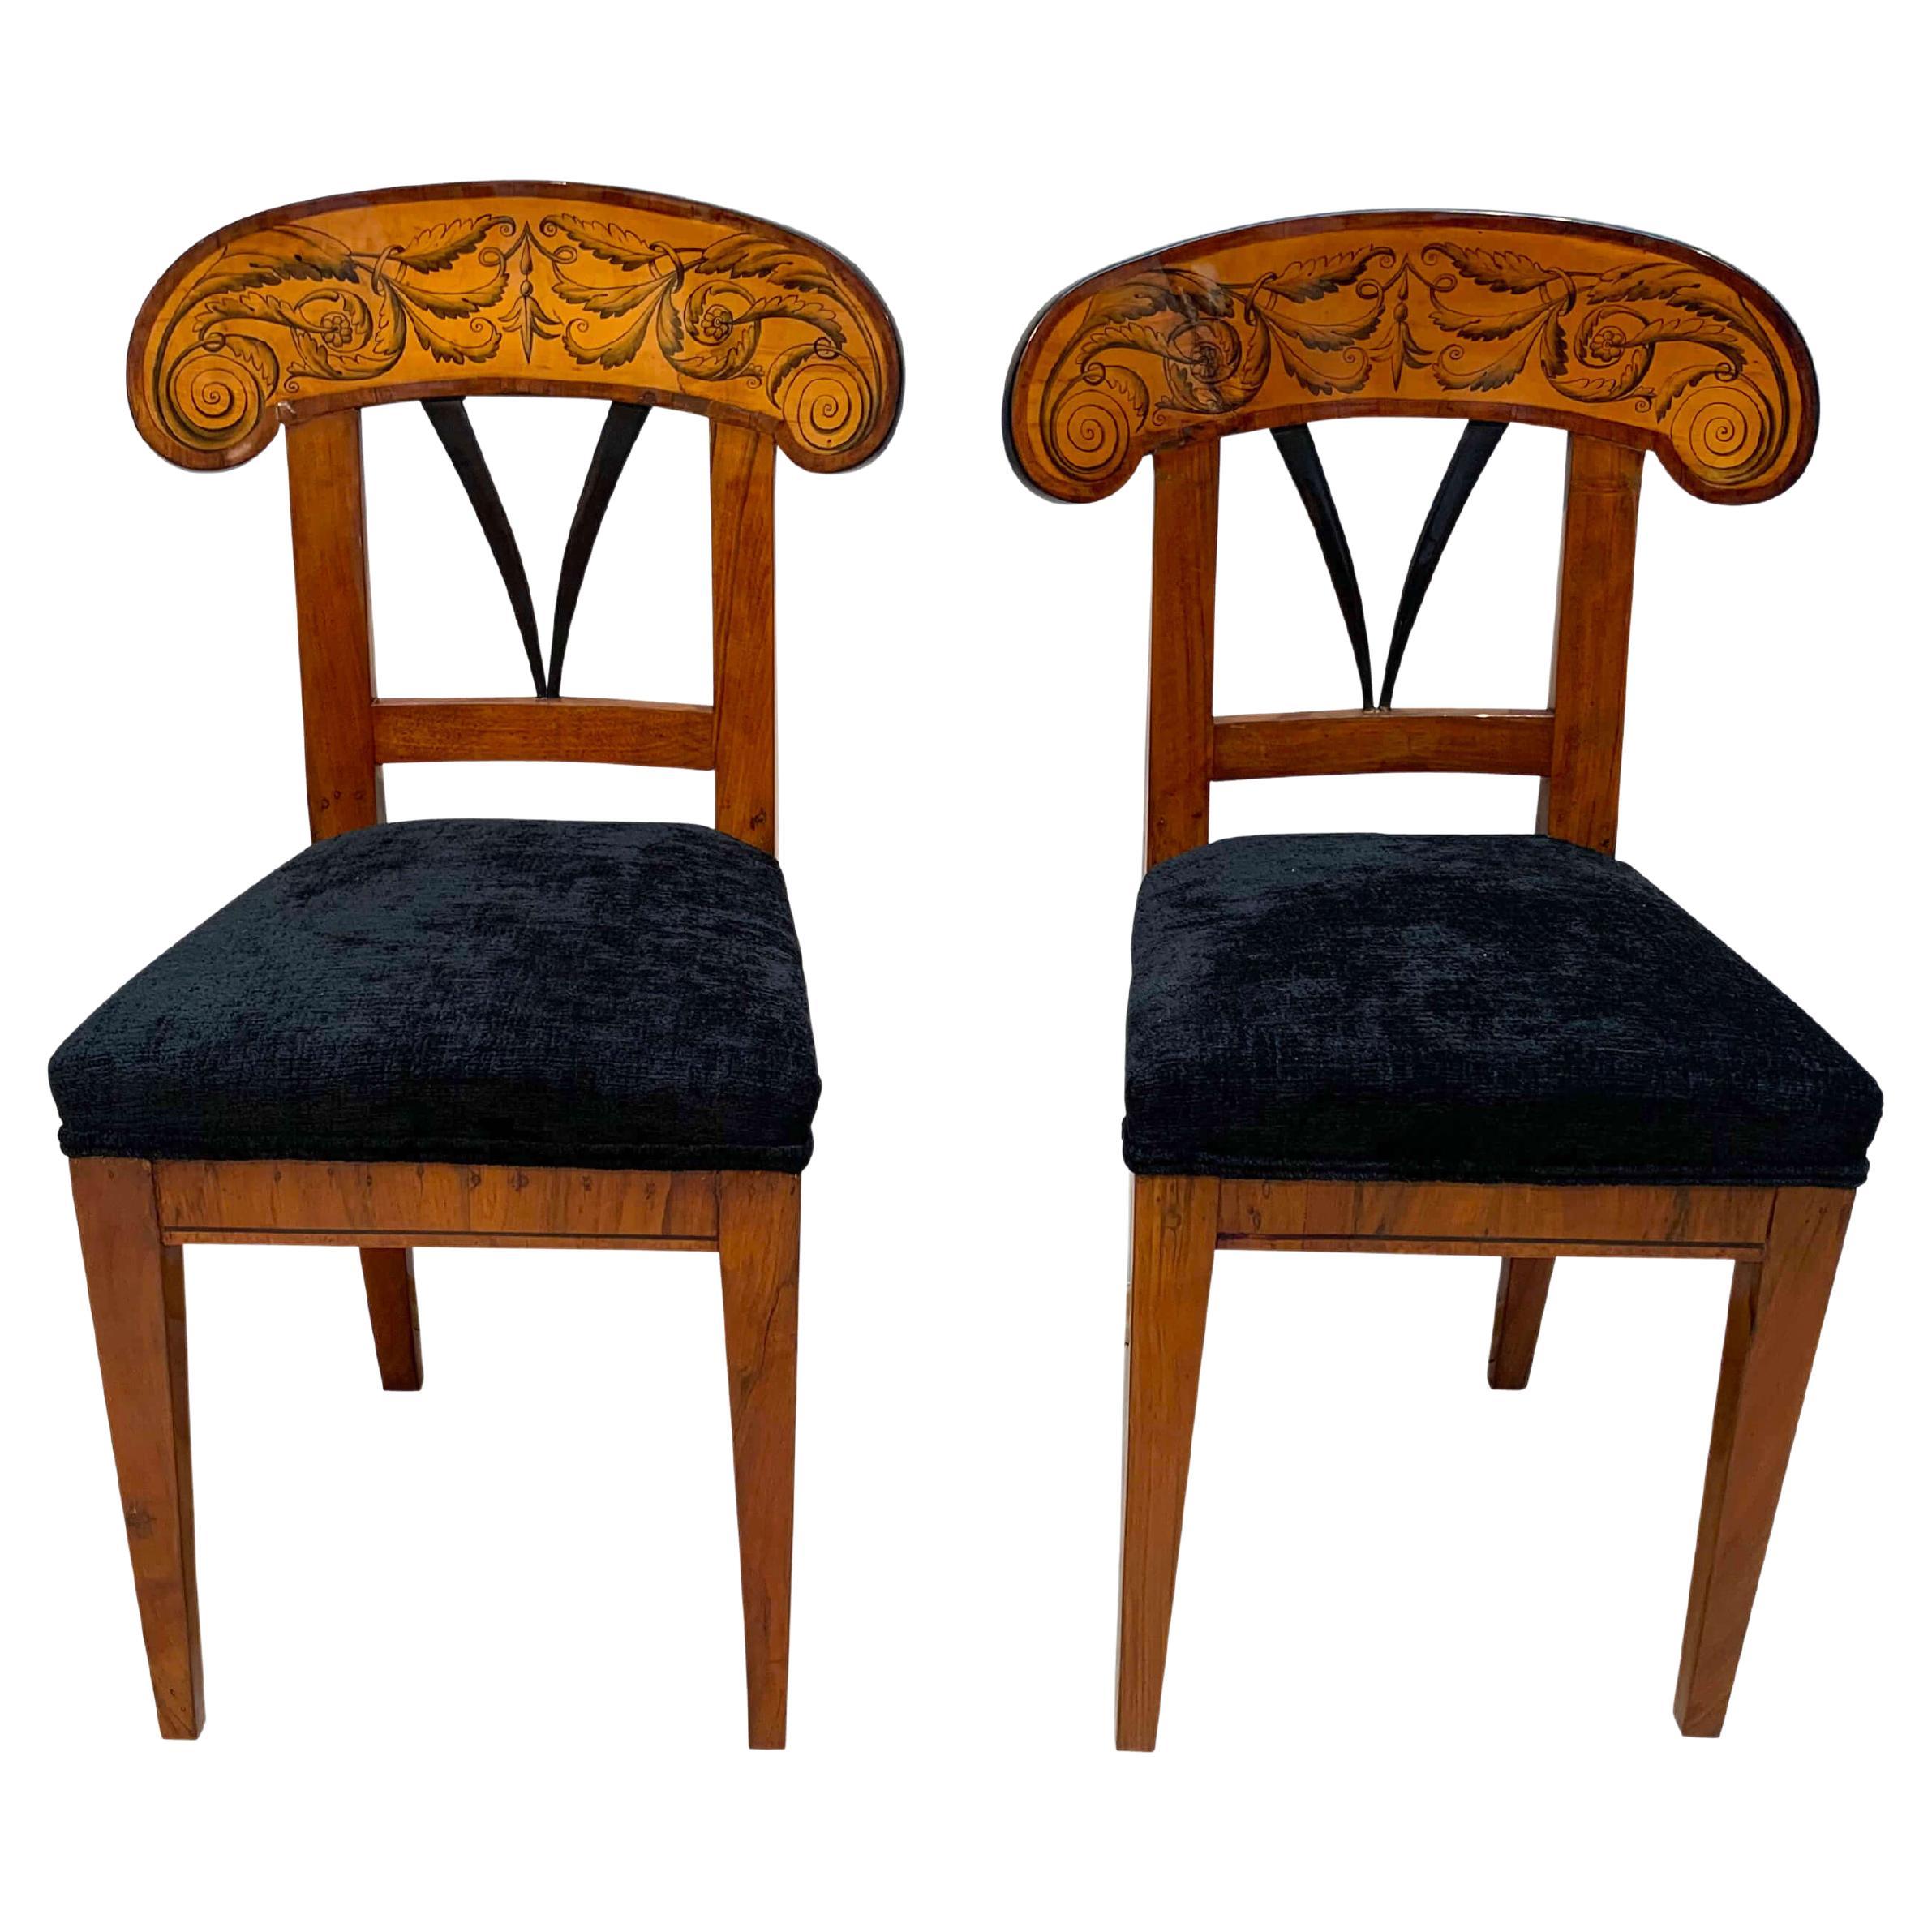 Pair of Biedermeier Shovel Chairs with Ink Painting, Walnut, South German, 1830s